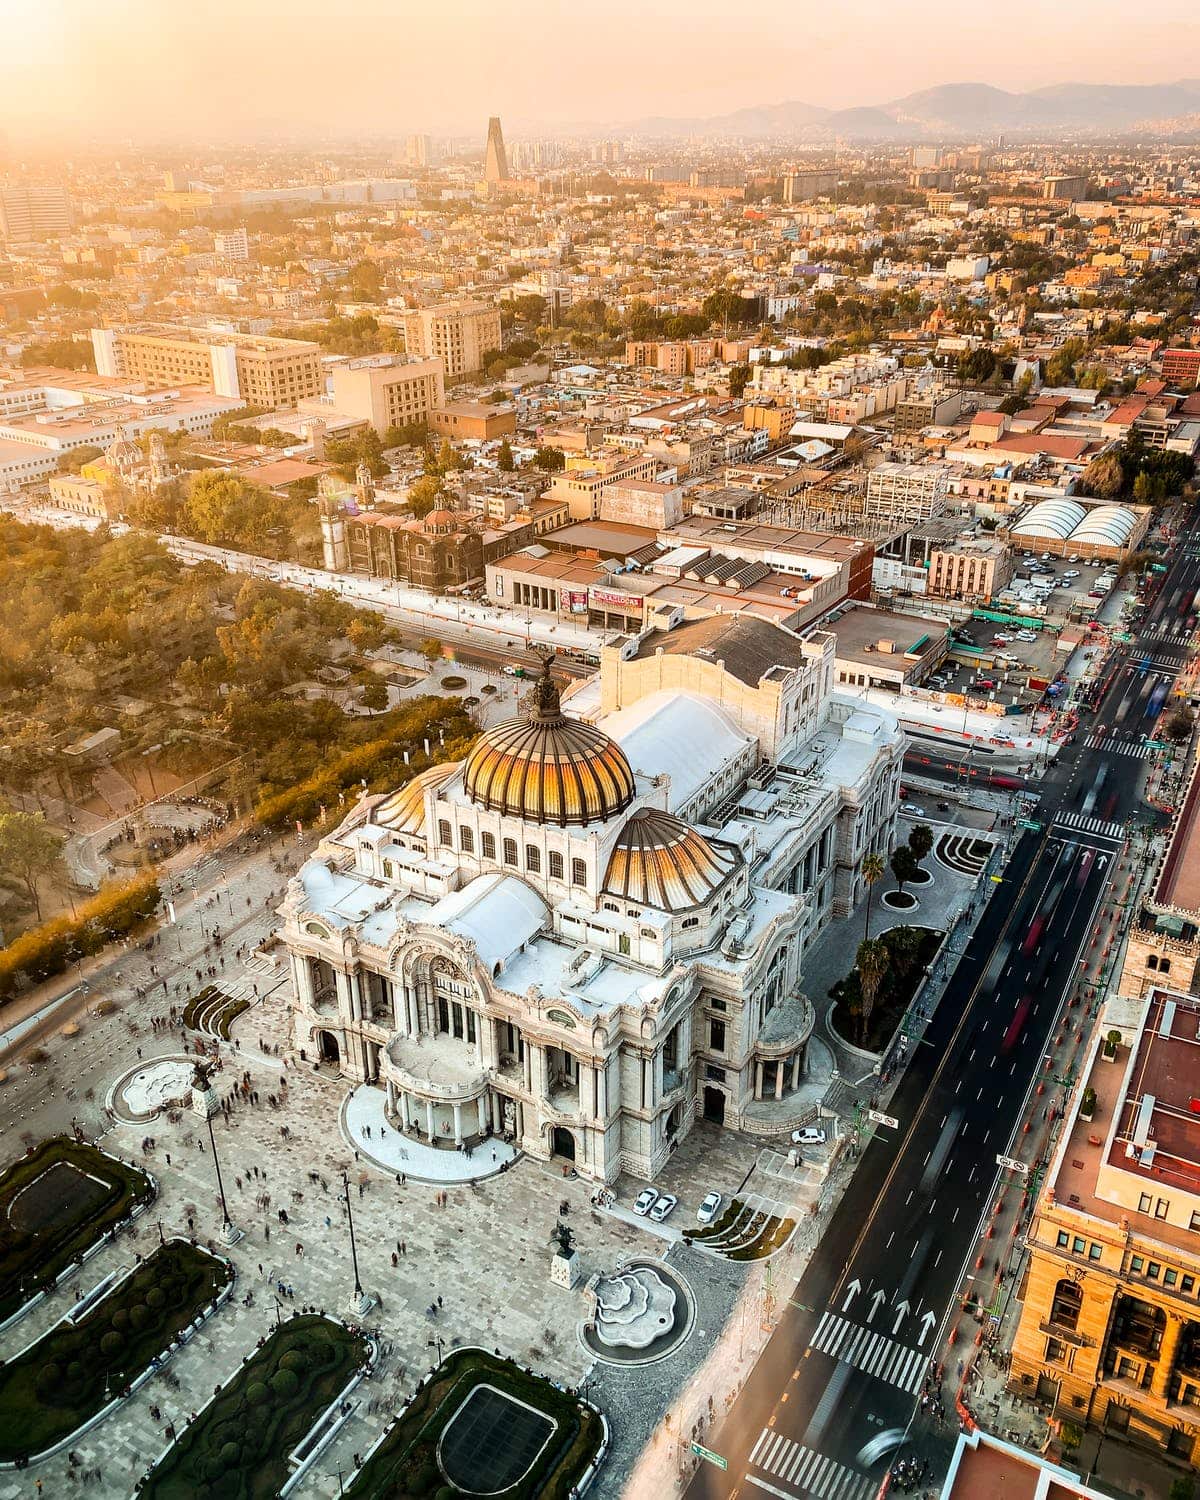 What changes are Mexico making to positively impact the future?